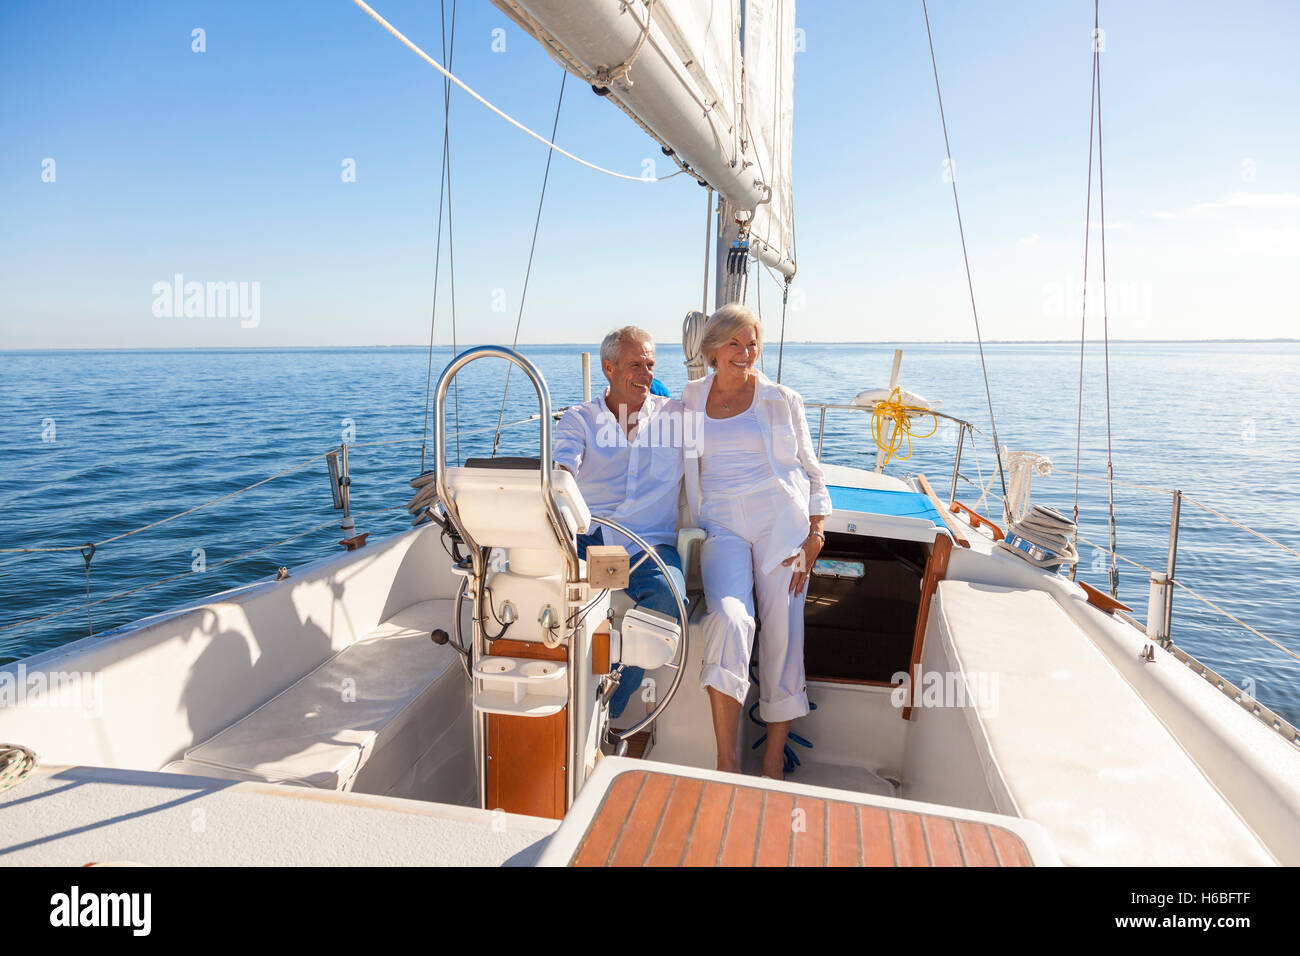 A happy senior couple laughing having fun sailing at the wheel of a yacht or sail boat on a calm blue sea Stock Photo